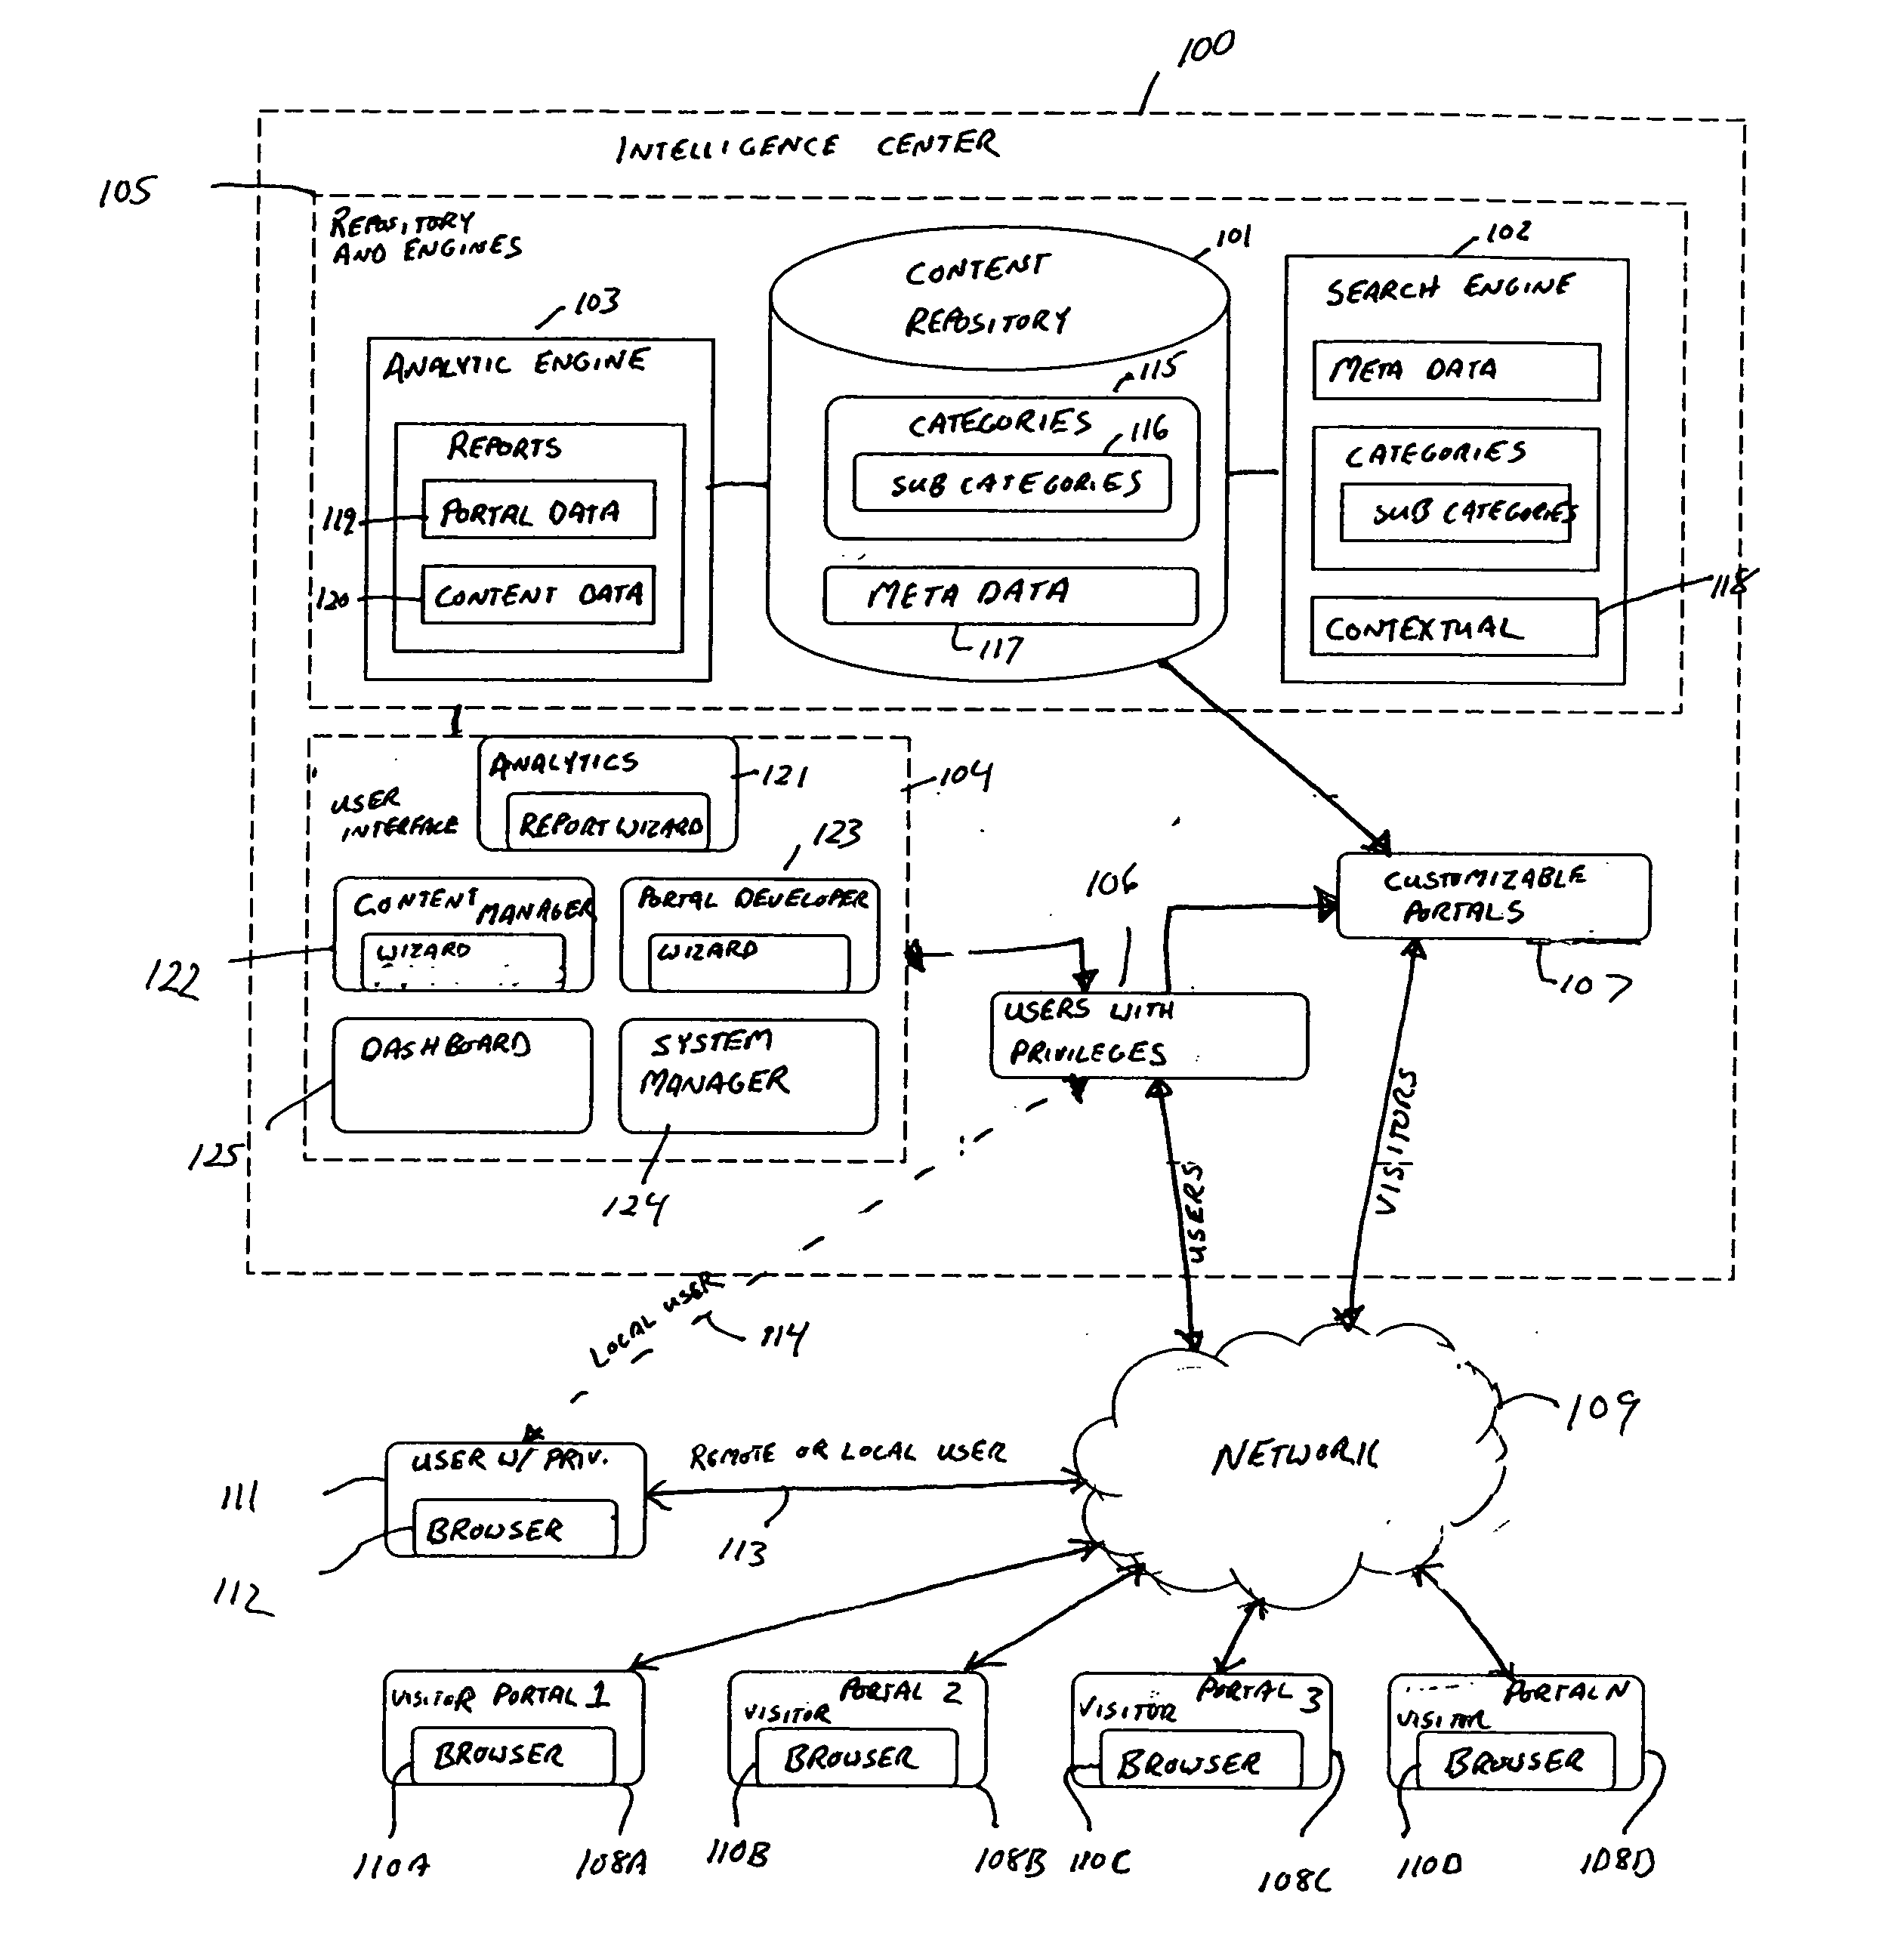 System and method for providing intelligence centers